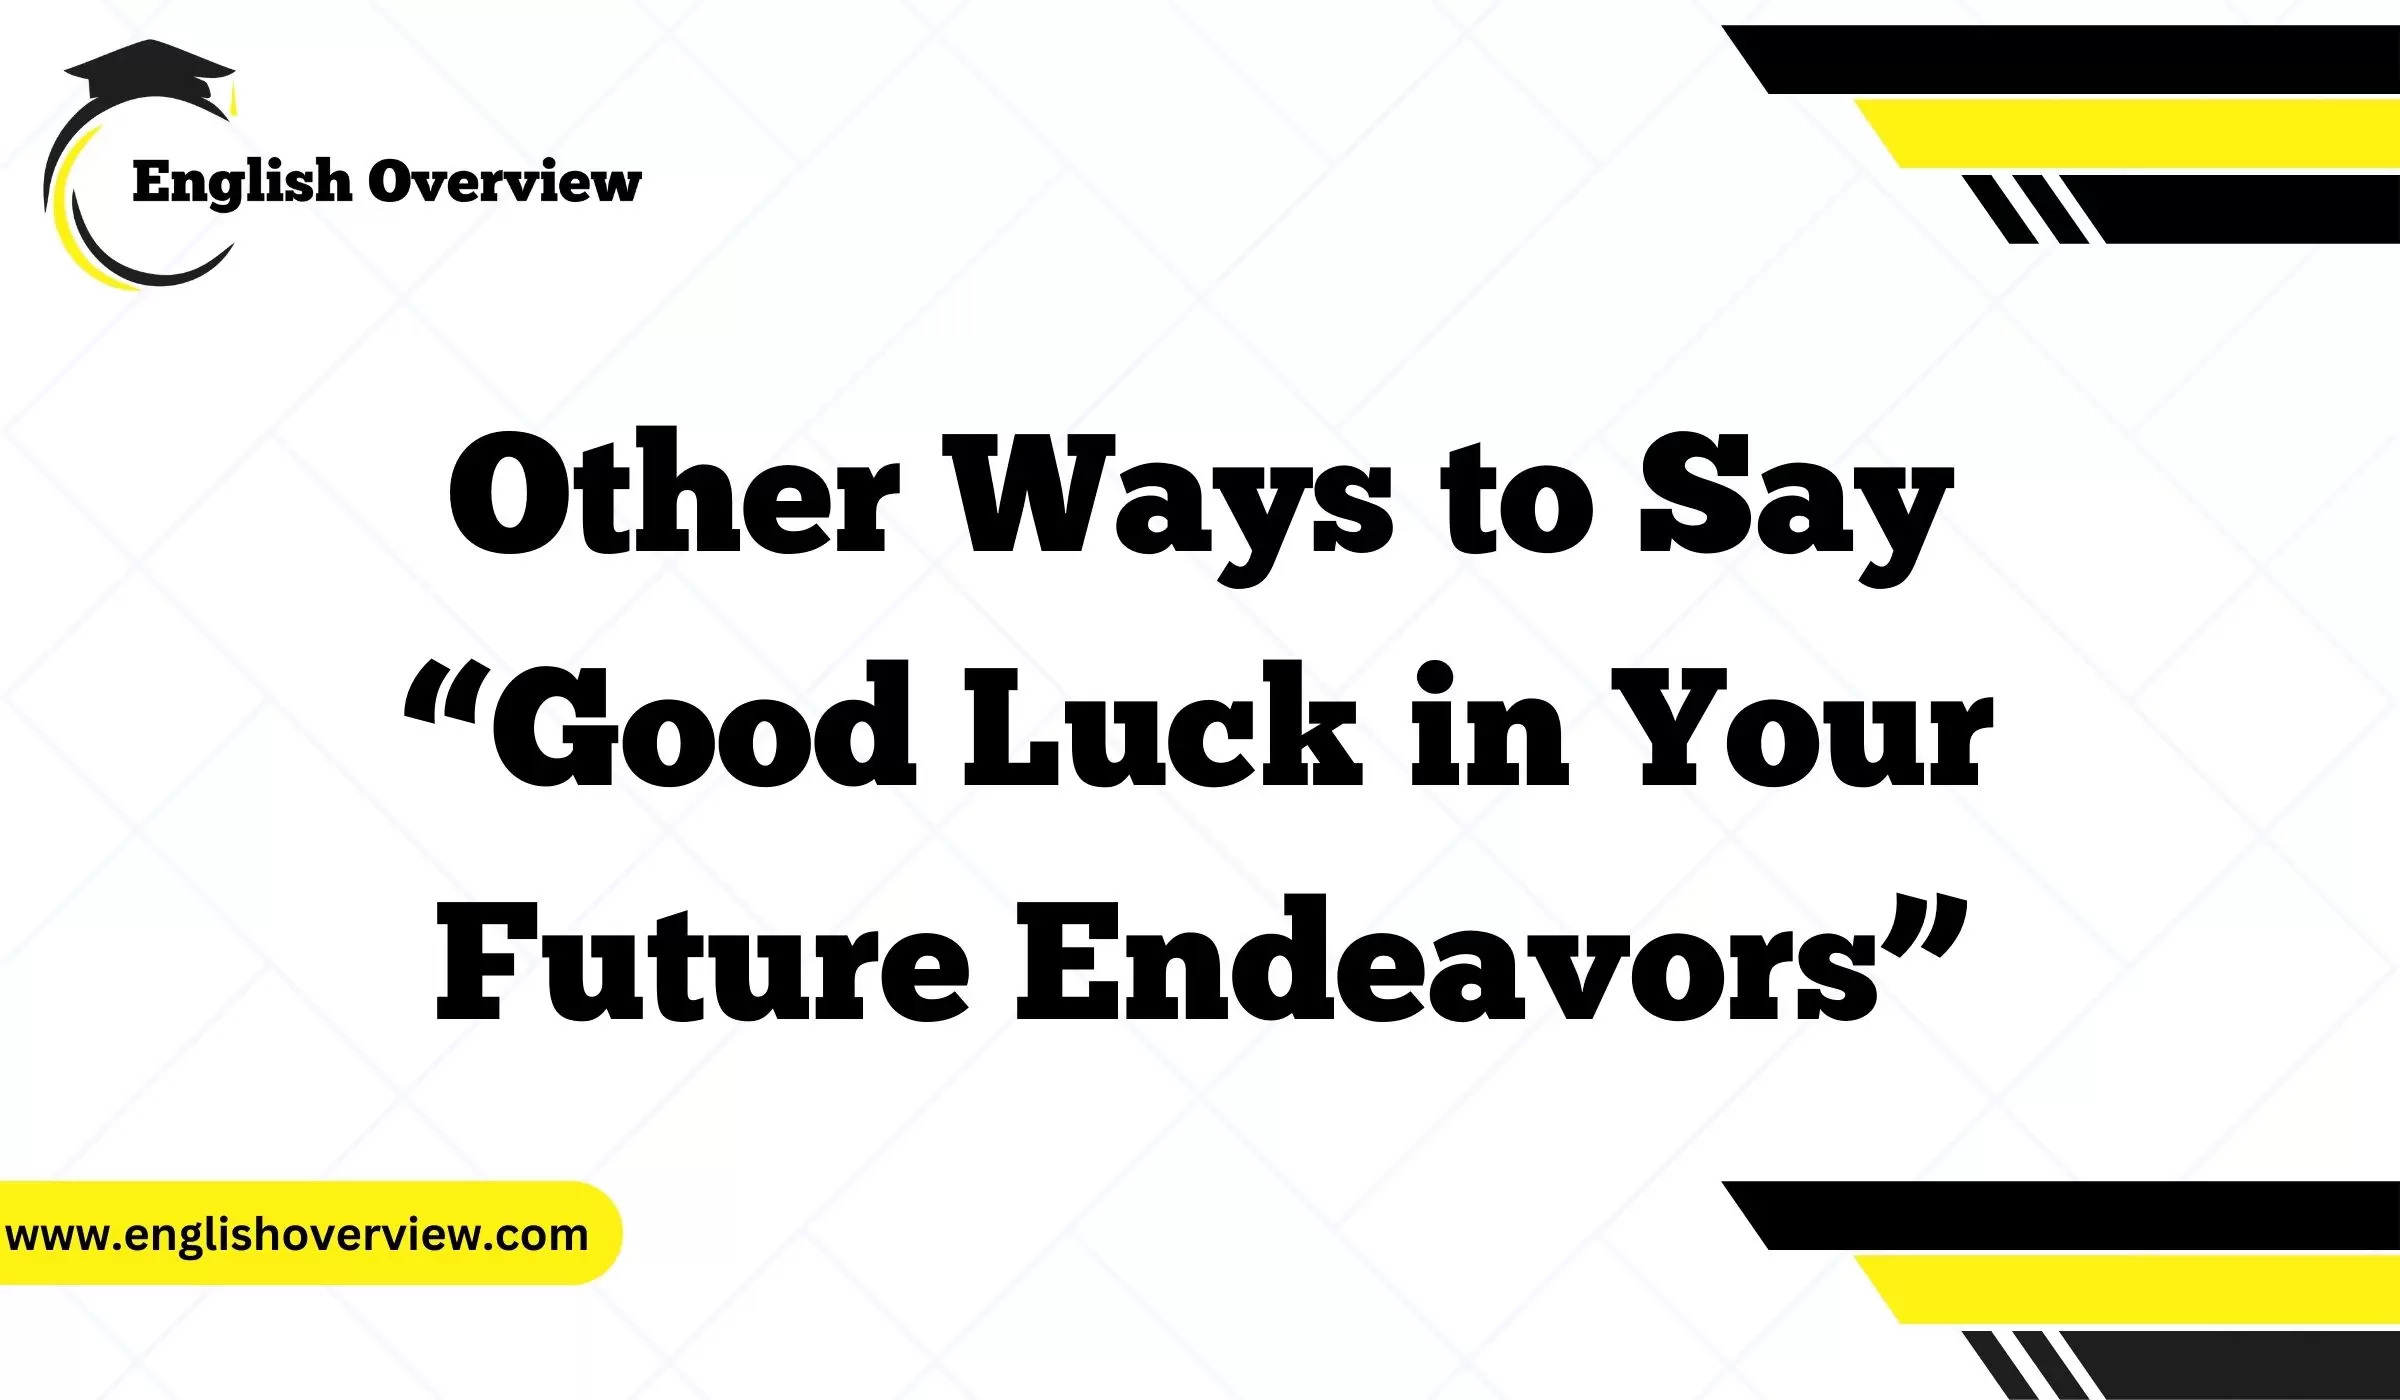 Other Ways to Say “Good Luck in Your Future Endeavors”